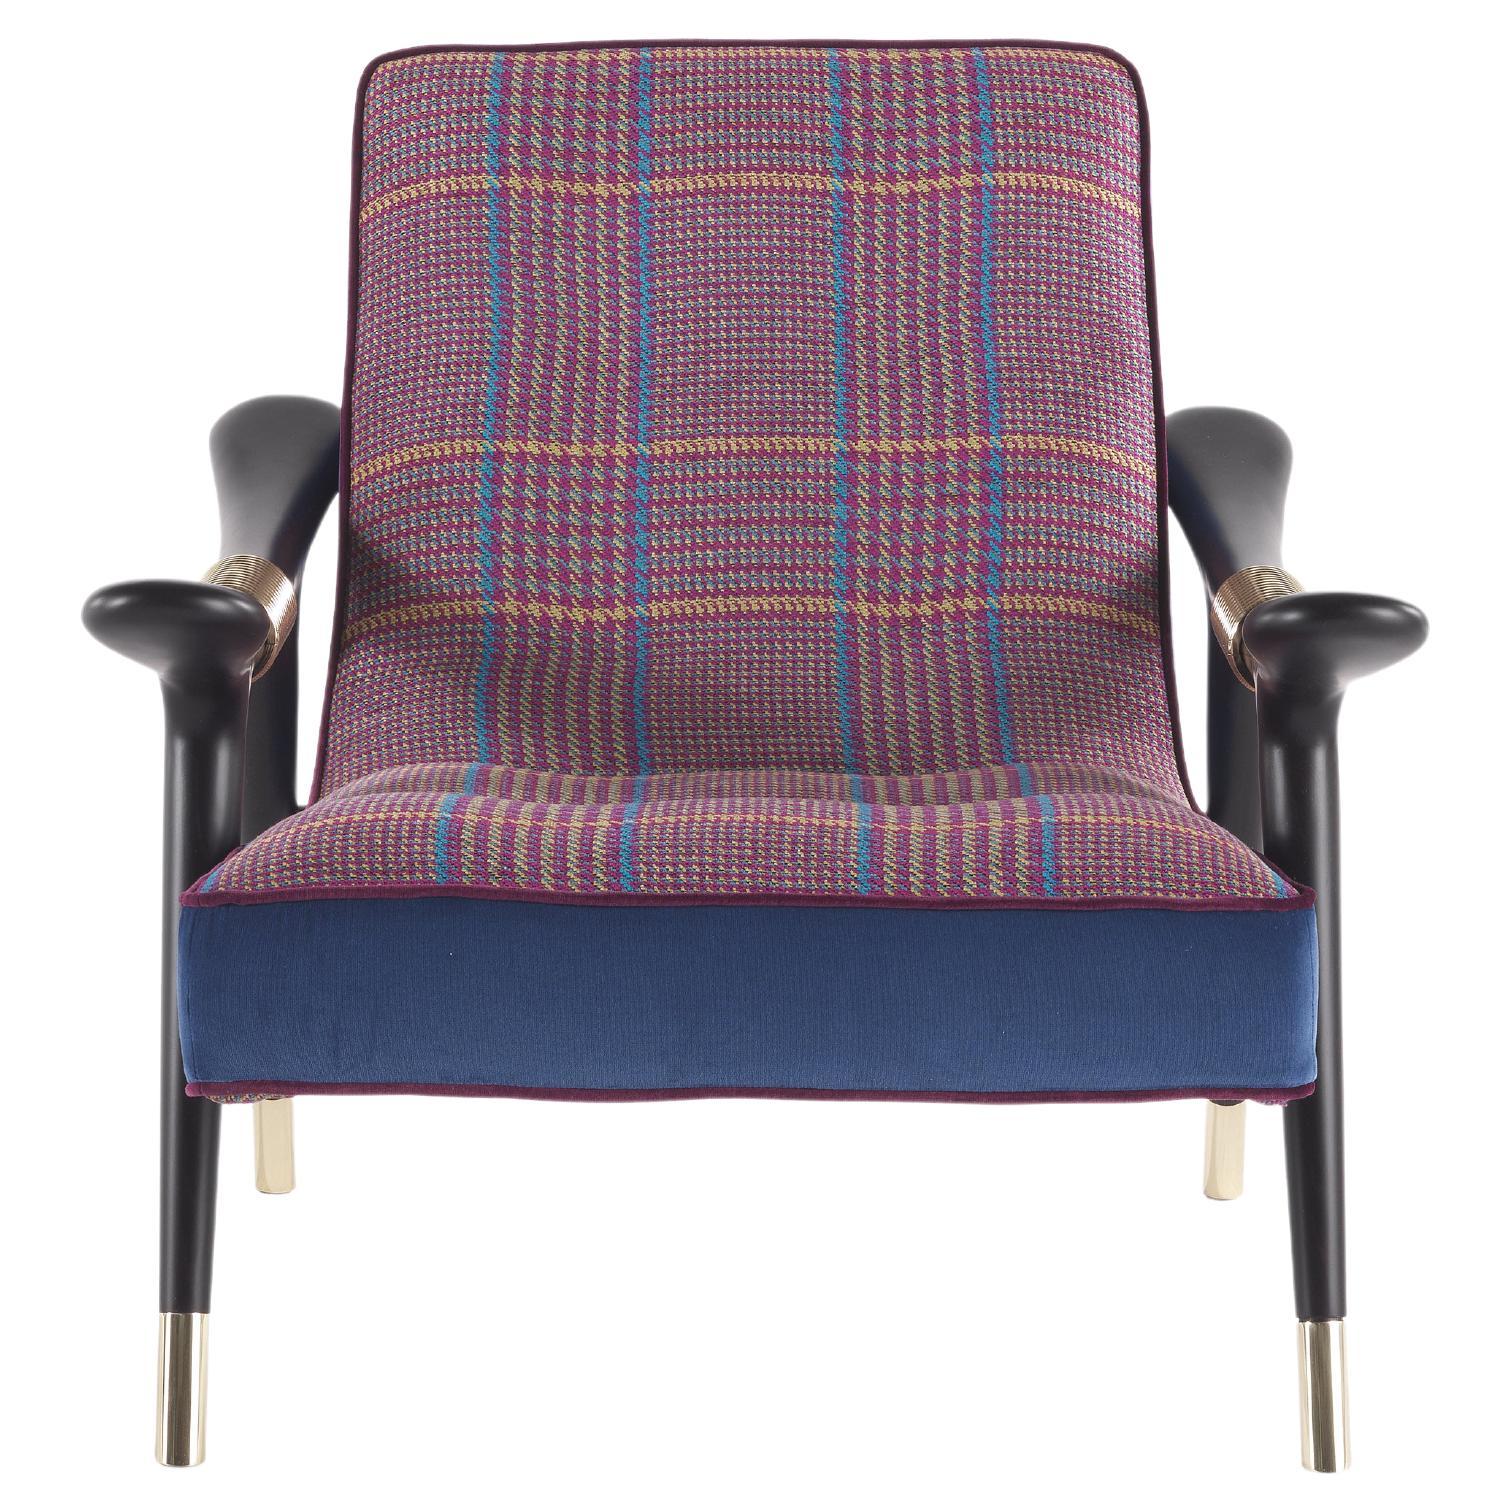 21st Century Masai Armchair in Overdose Fabric by Etro Home Interiors